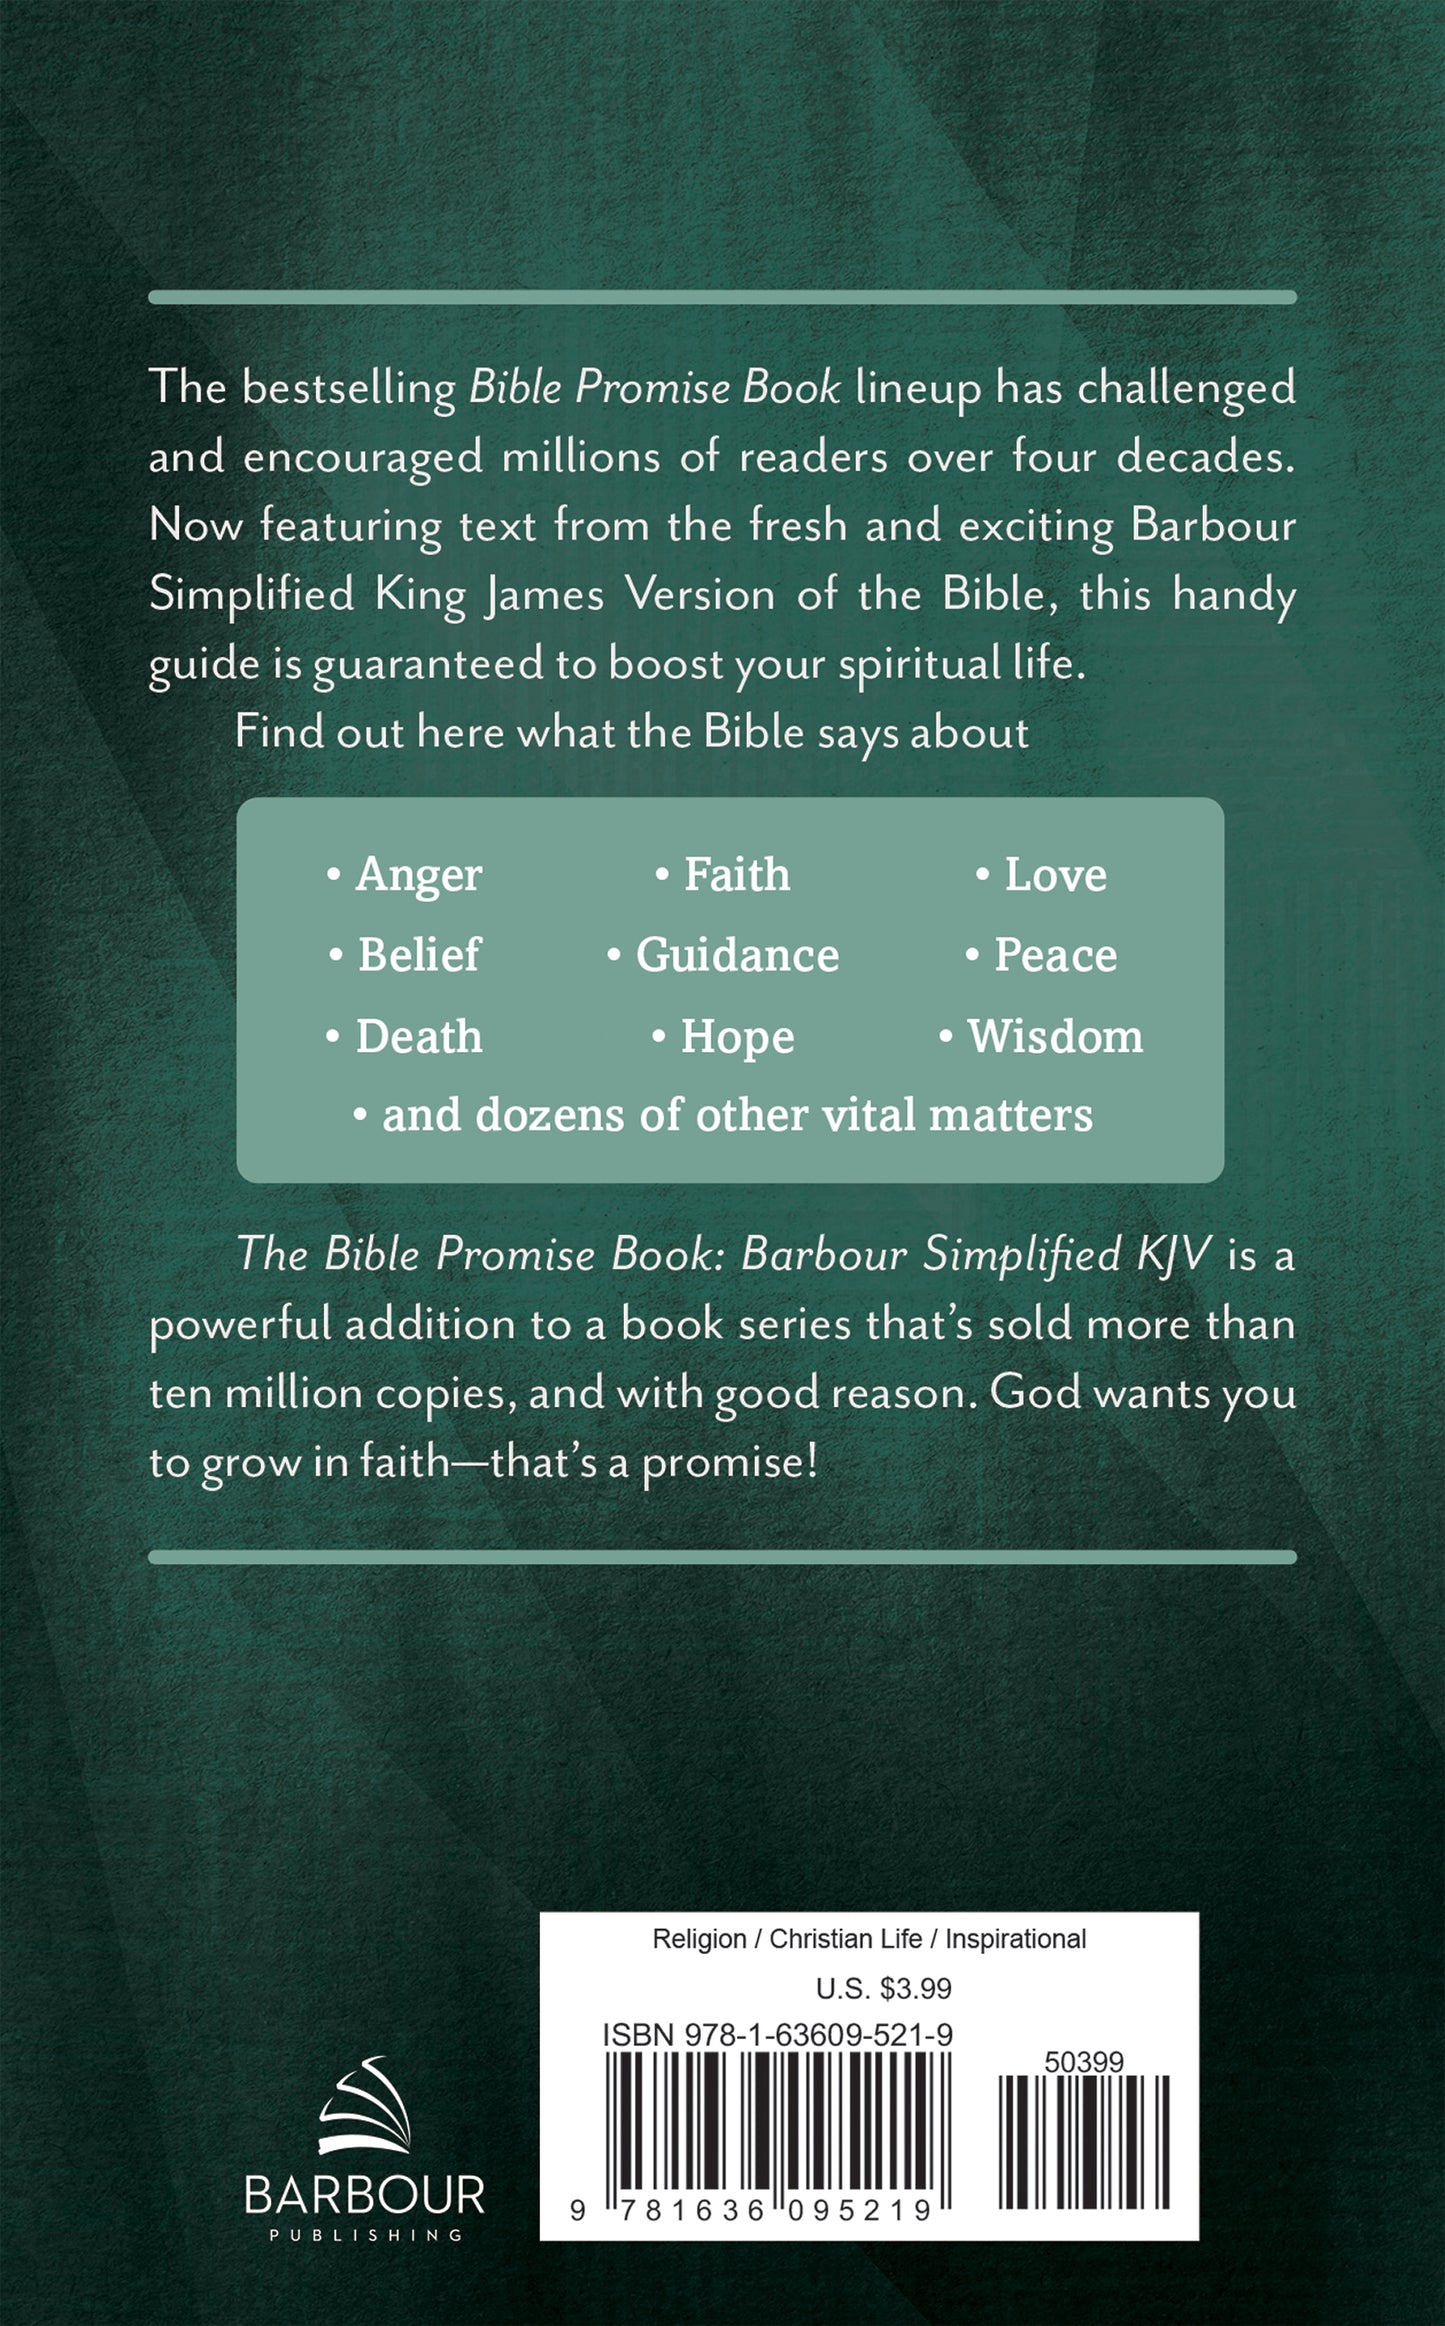 The Bible Promise Book : Simplified KJV